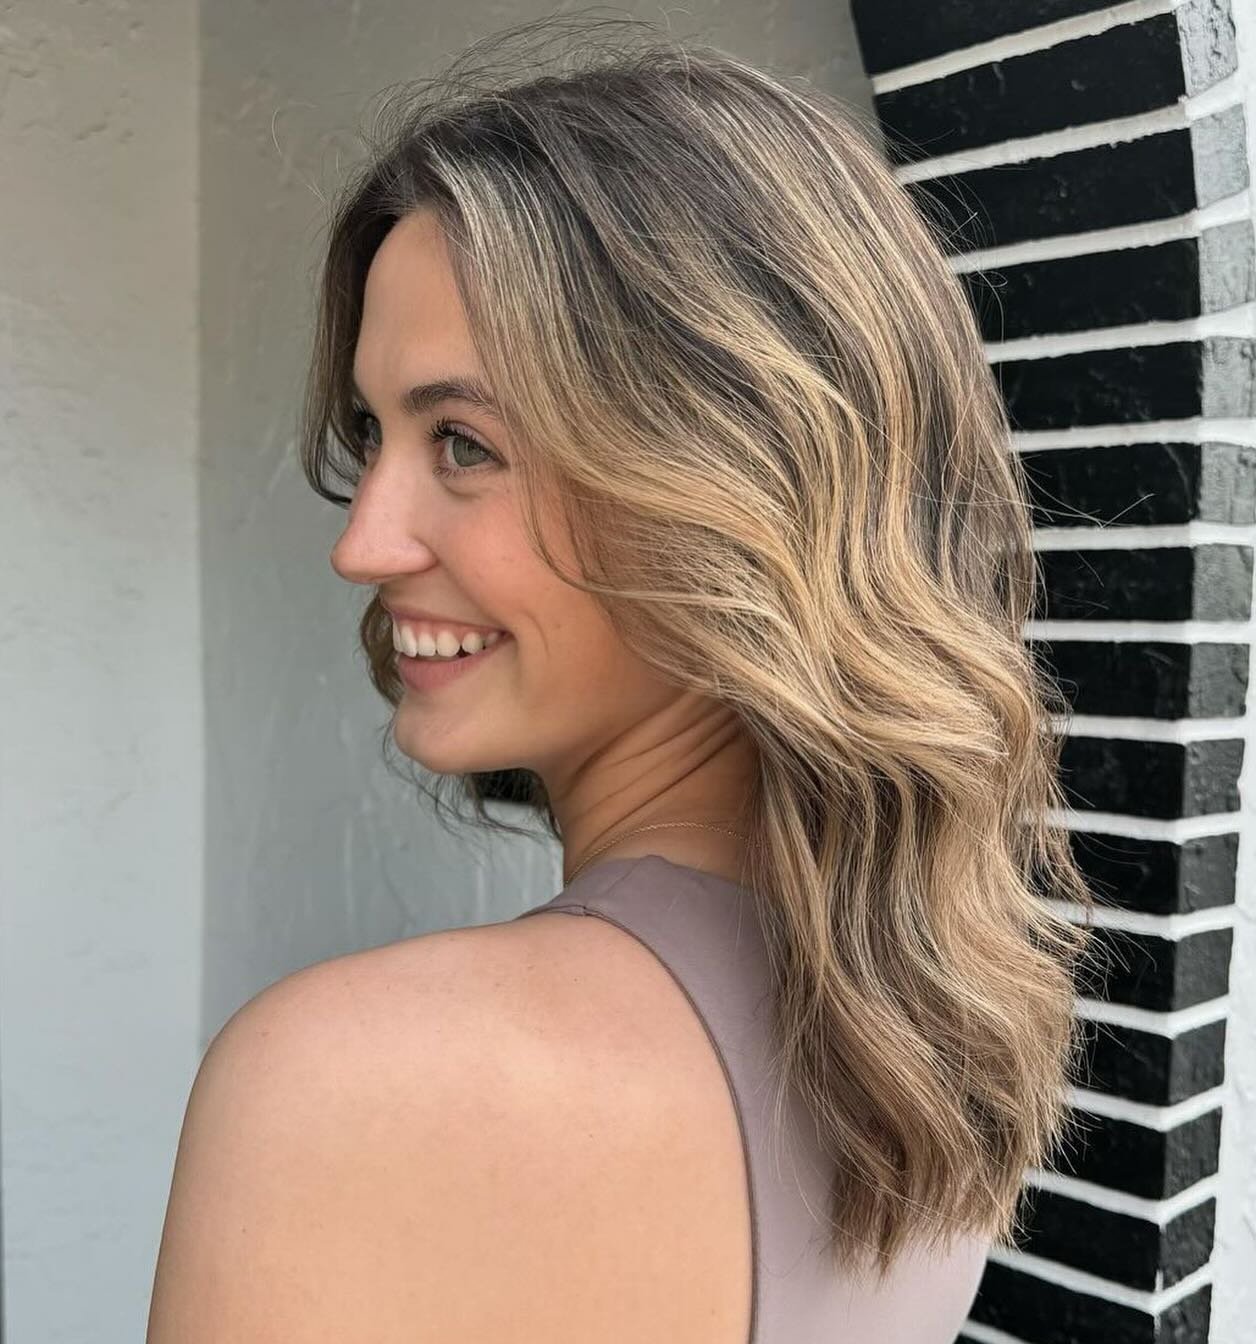 We may be bias, but we feel like that smile is because of her fresh bronde balayage. Brunette girls can be brighter for the summer with low maintenance. Just choose one of our blonding packages and we will completely customize it for you. 

Stylist: 